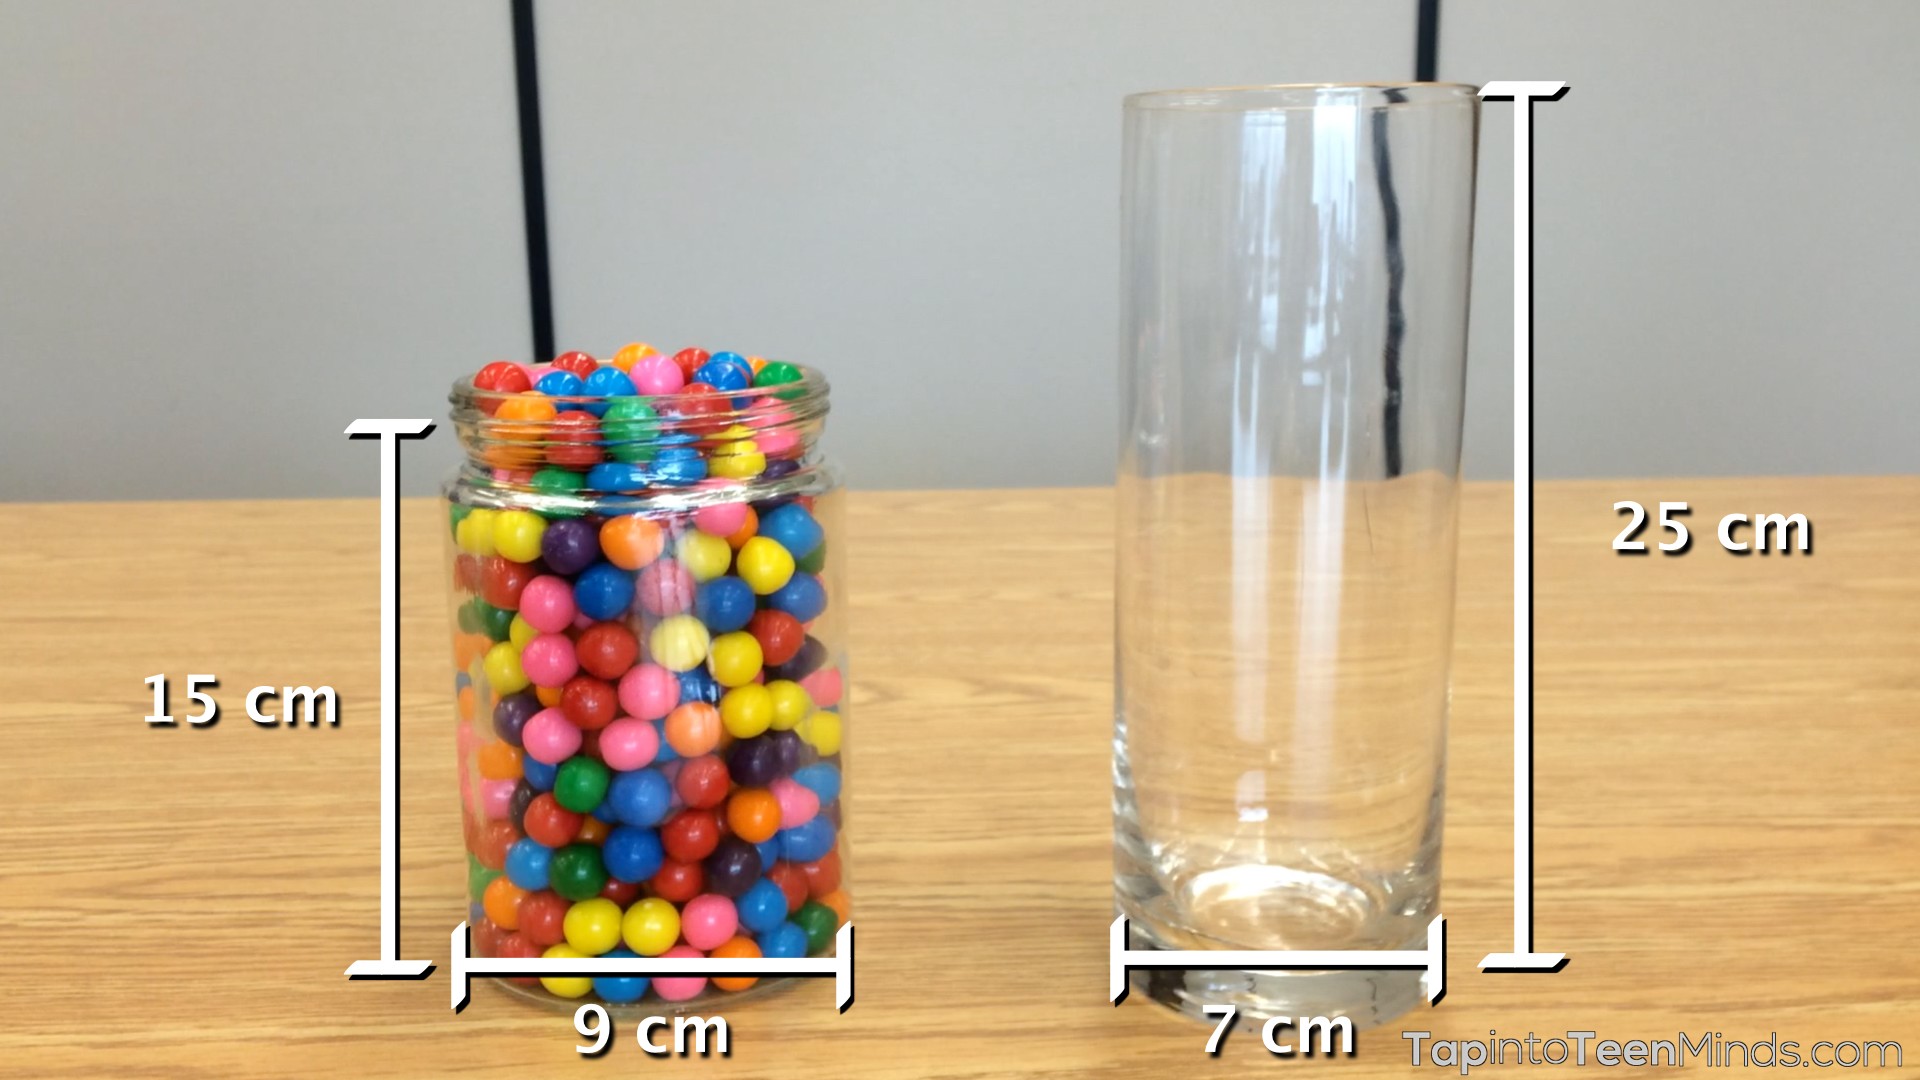 Guessing Gumballs Sequel - Dimensions of Both Containers